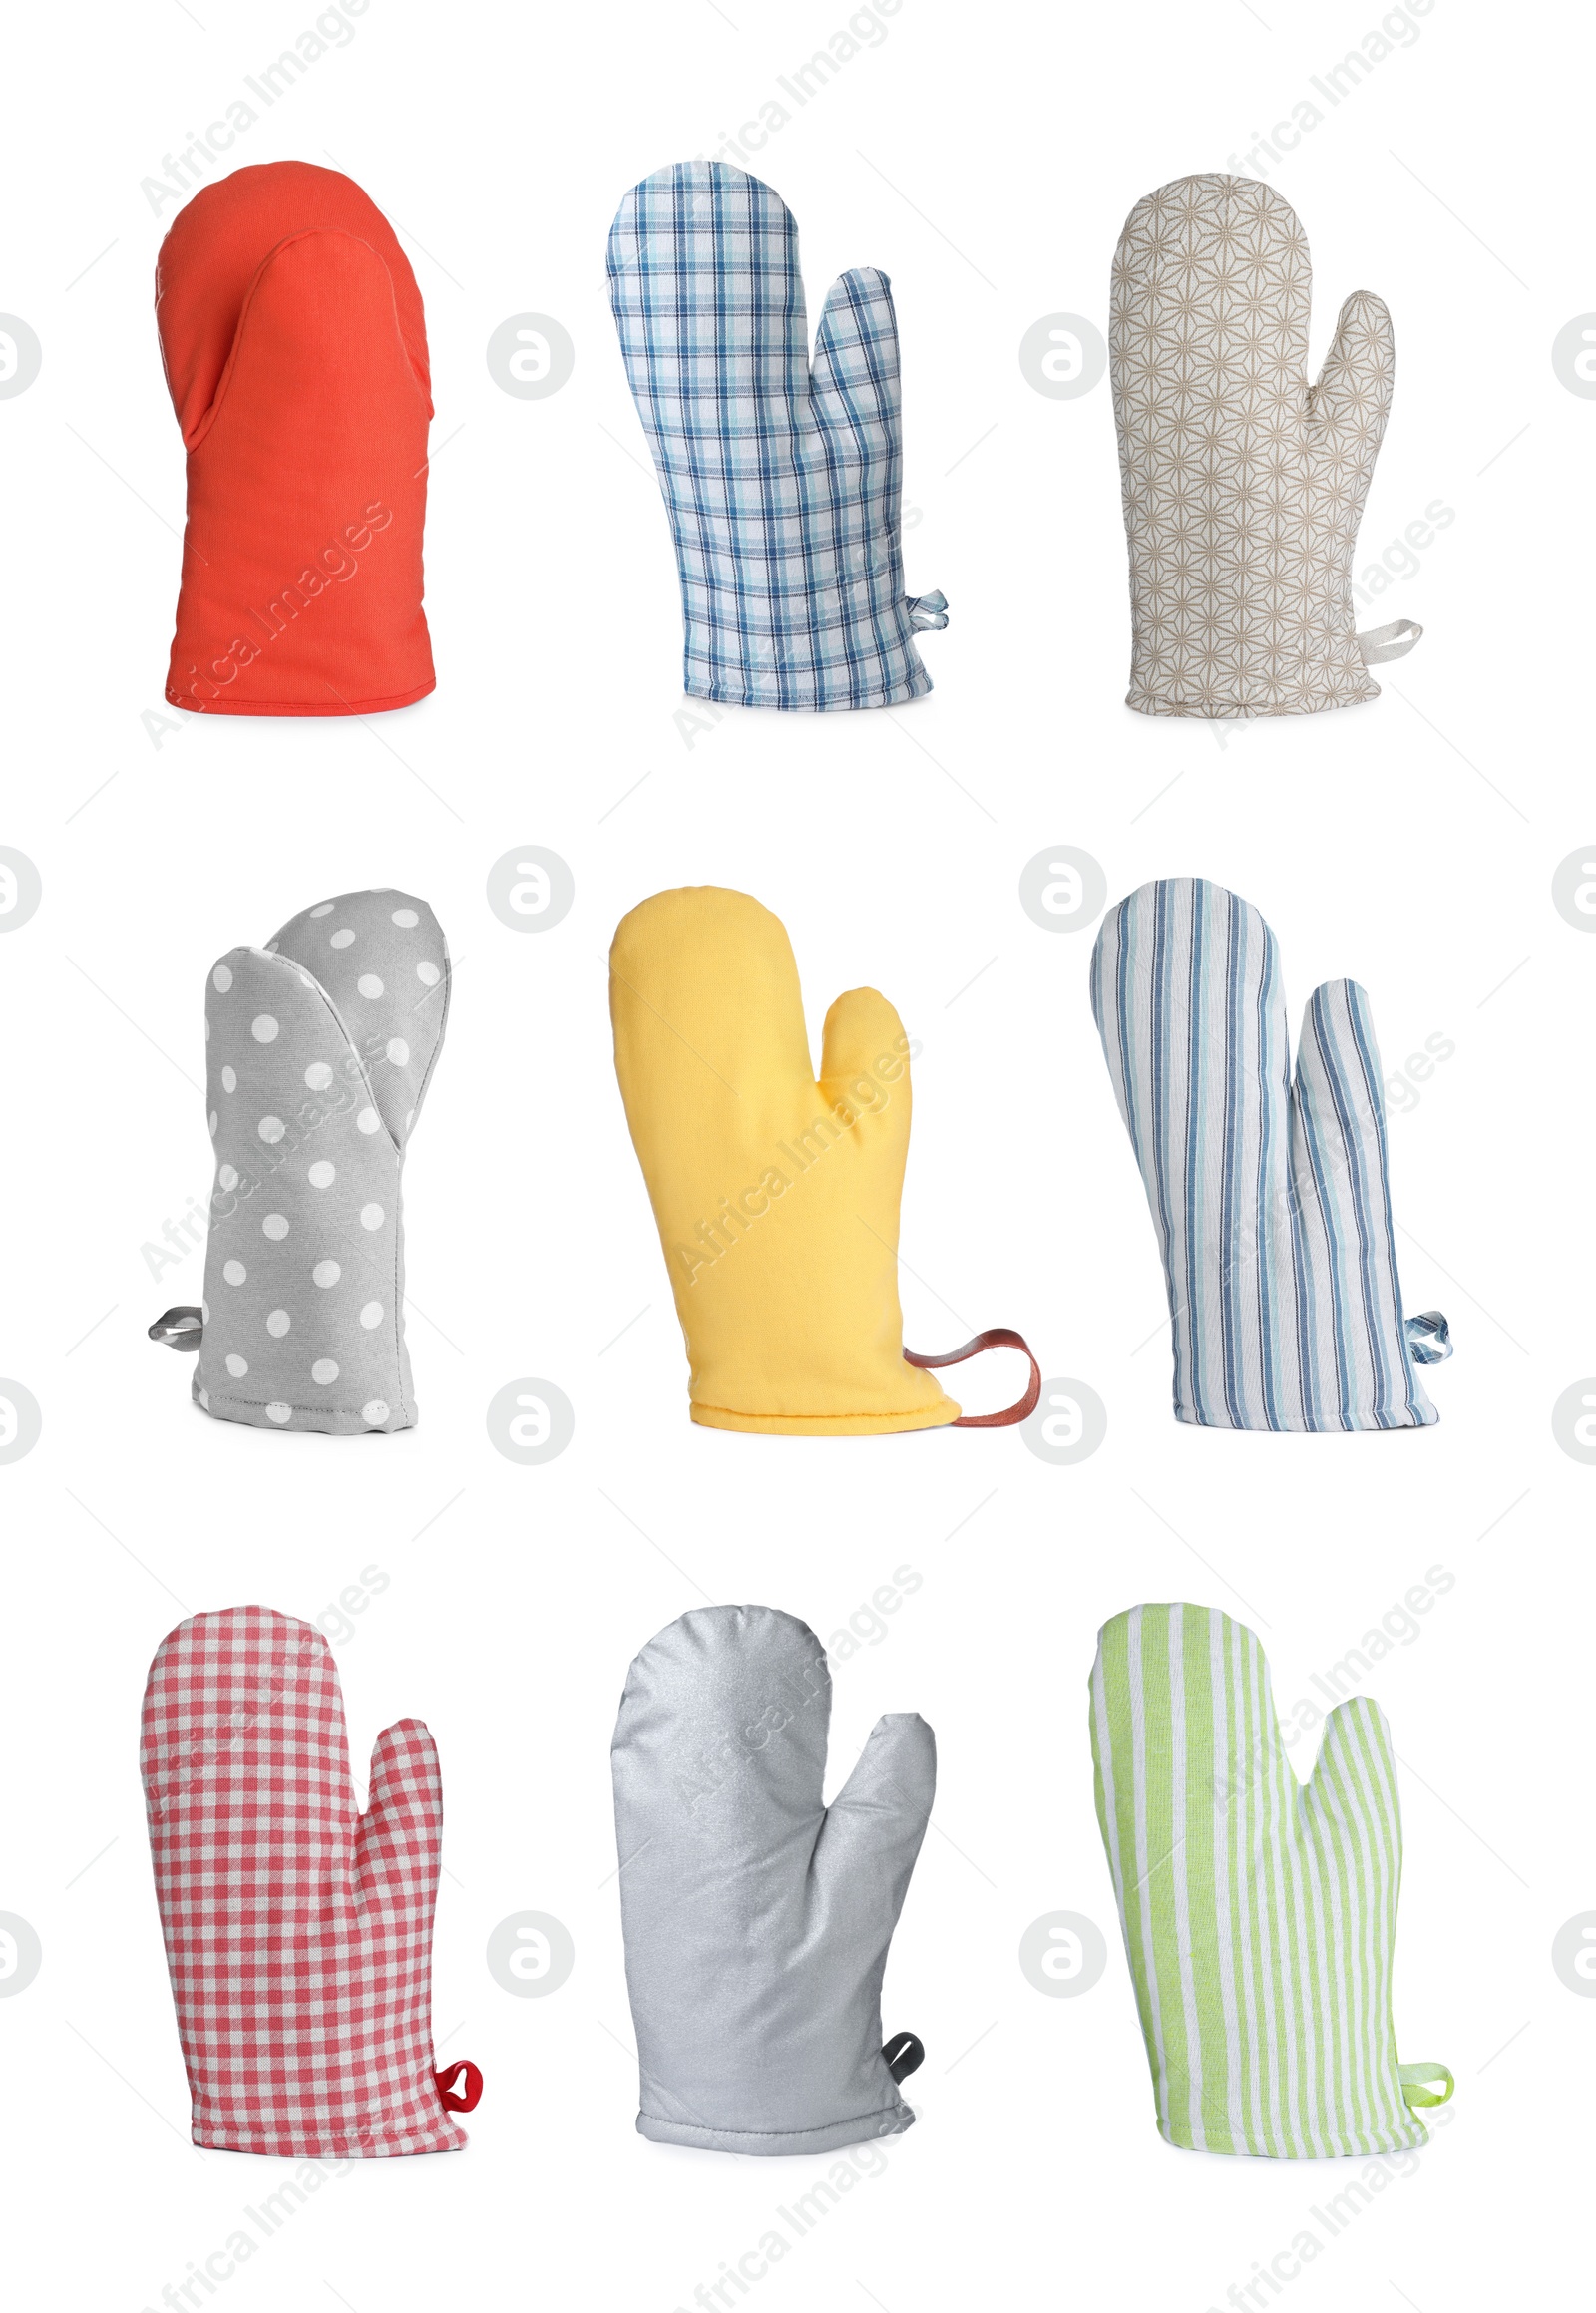 Image of Set with different oven gloves on white background